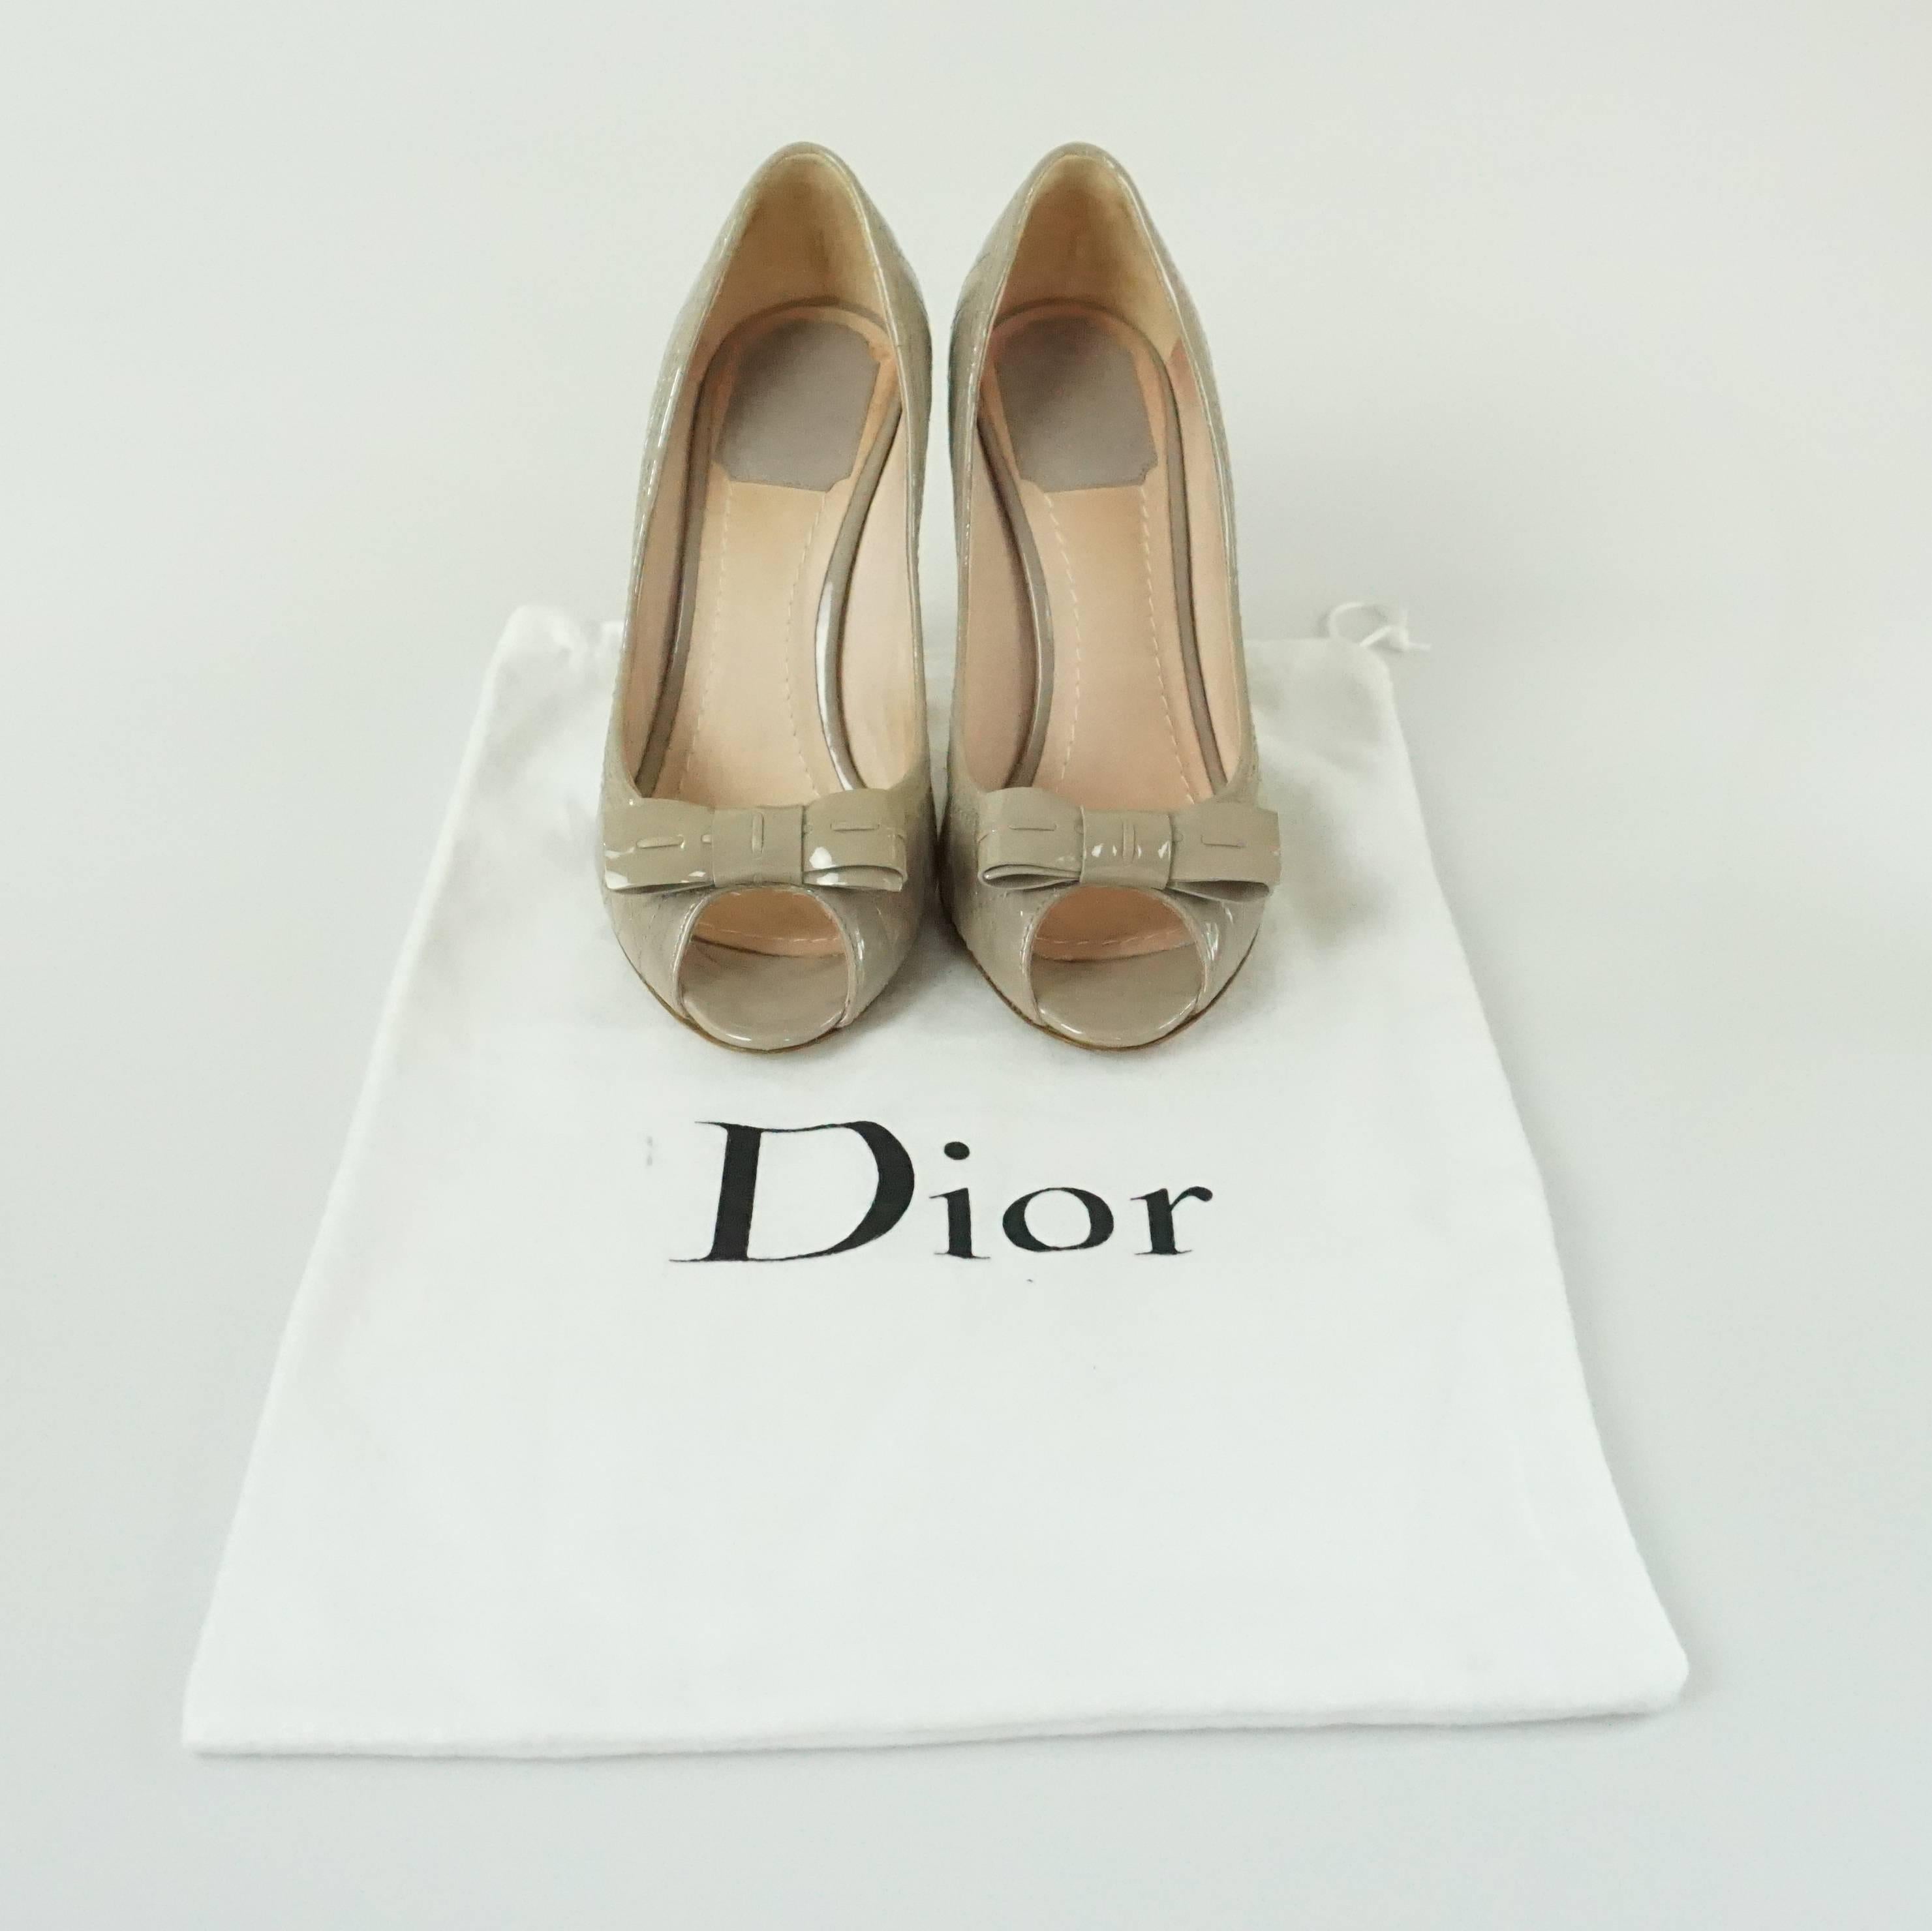 Christian Dior Taupe Patent Leather Peeptoe - 36.5 2